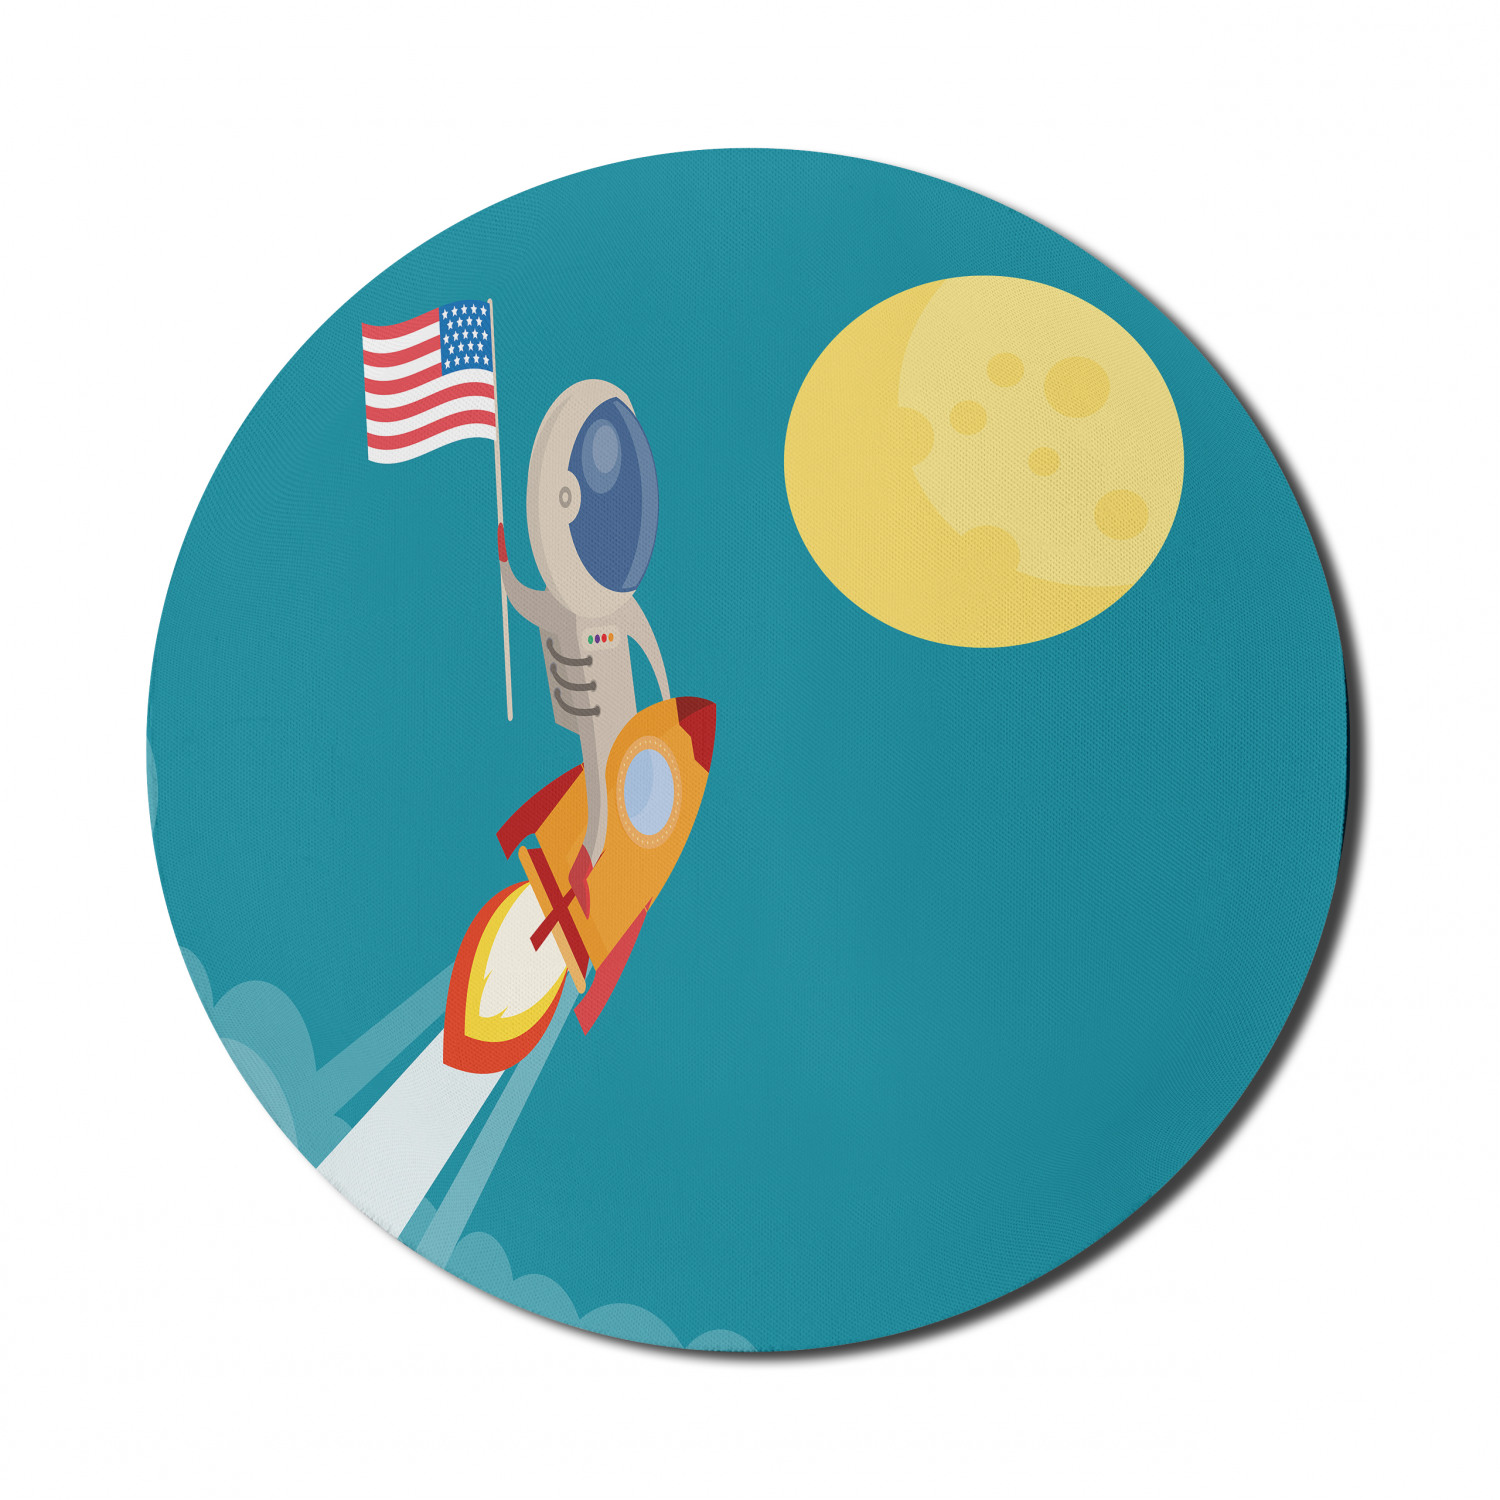 Alien Mouse Pad for Computers, Cartoon of American Flag Held by Astronaut Riding a Rocket to the Moon, Round Non-Slip Thick Rubber Modern Mousepad, 8" Round, Sea Blue and Multicolor, by Ambesonne - image 1 of 2